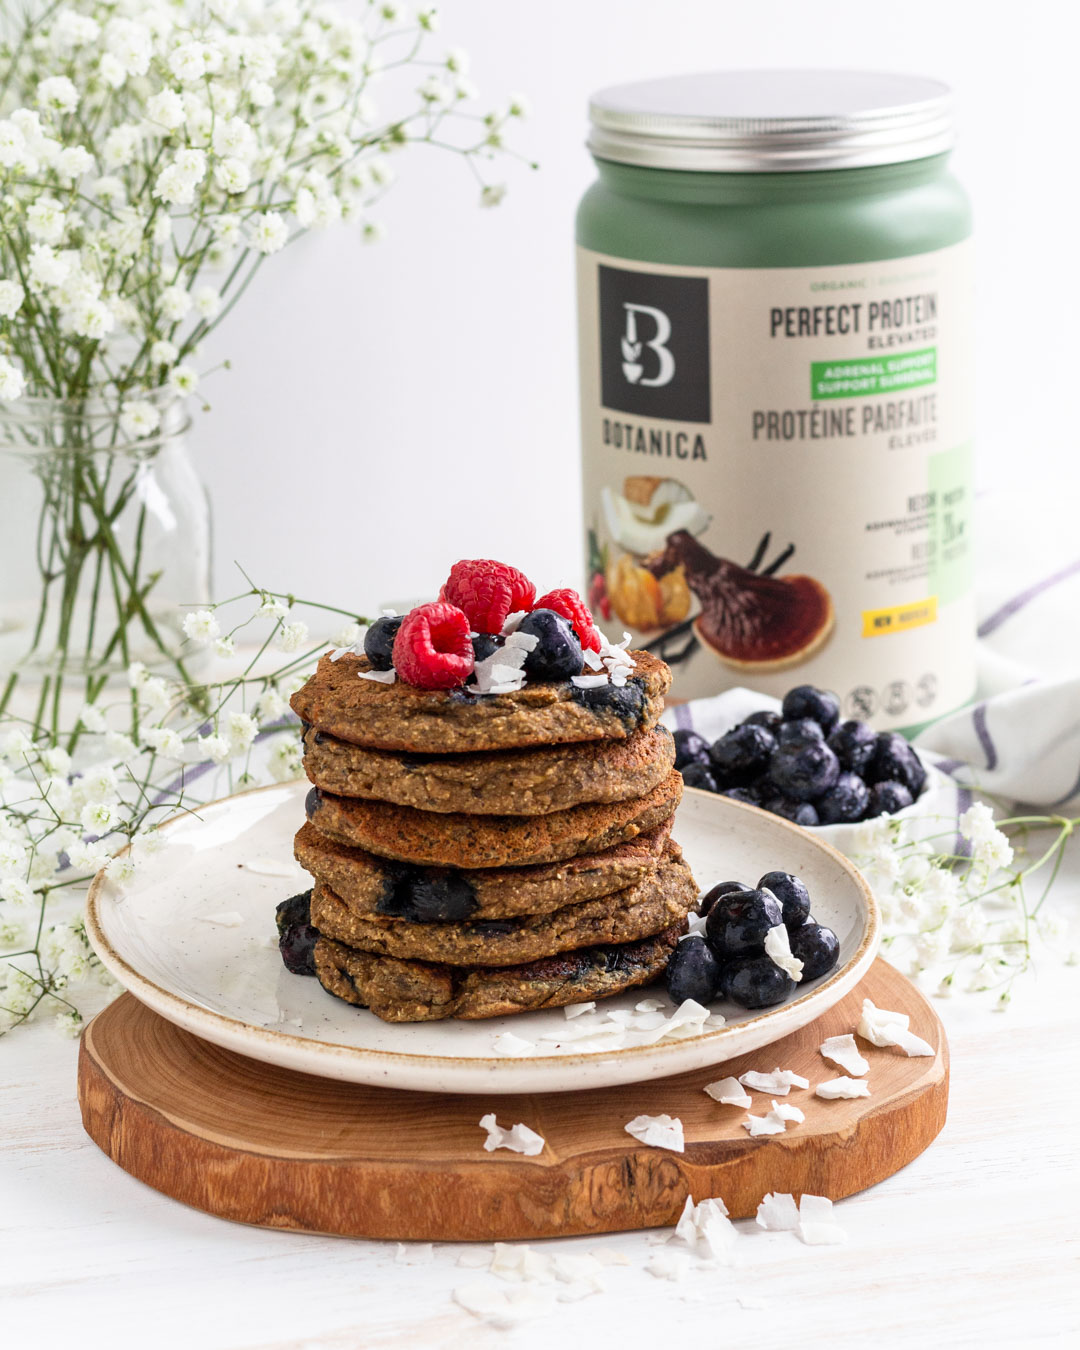 Botanica Perfect Protein Elevated Adrenal Support, vegan banana protein pancakes, blueberry pancakes, gluten-free pancakes, gluten-free vegan pancakes